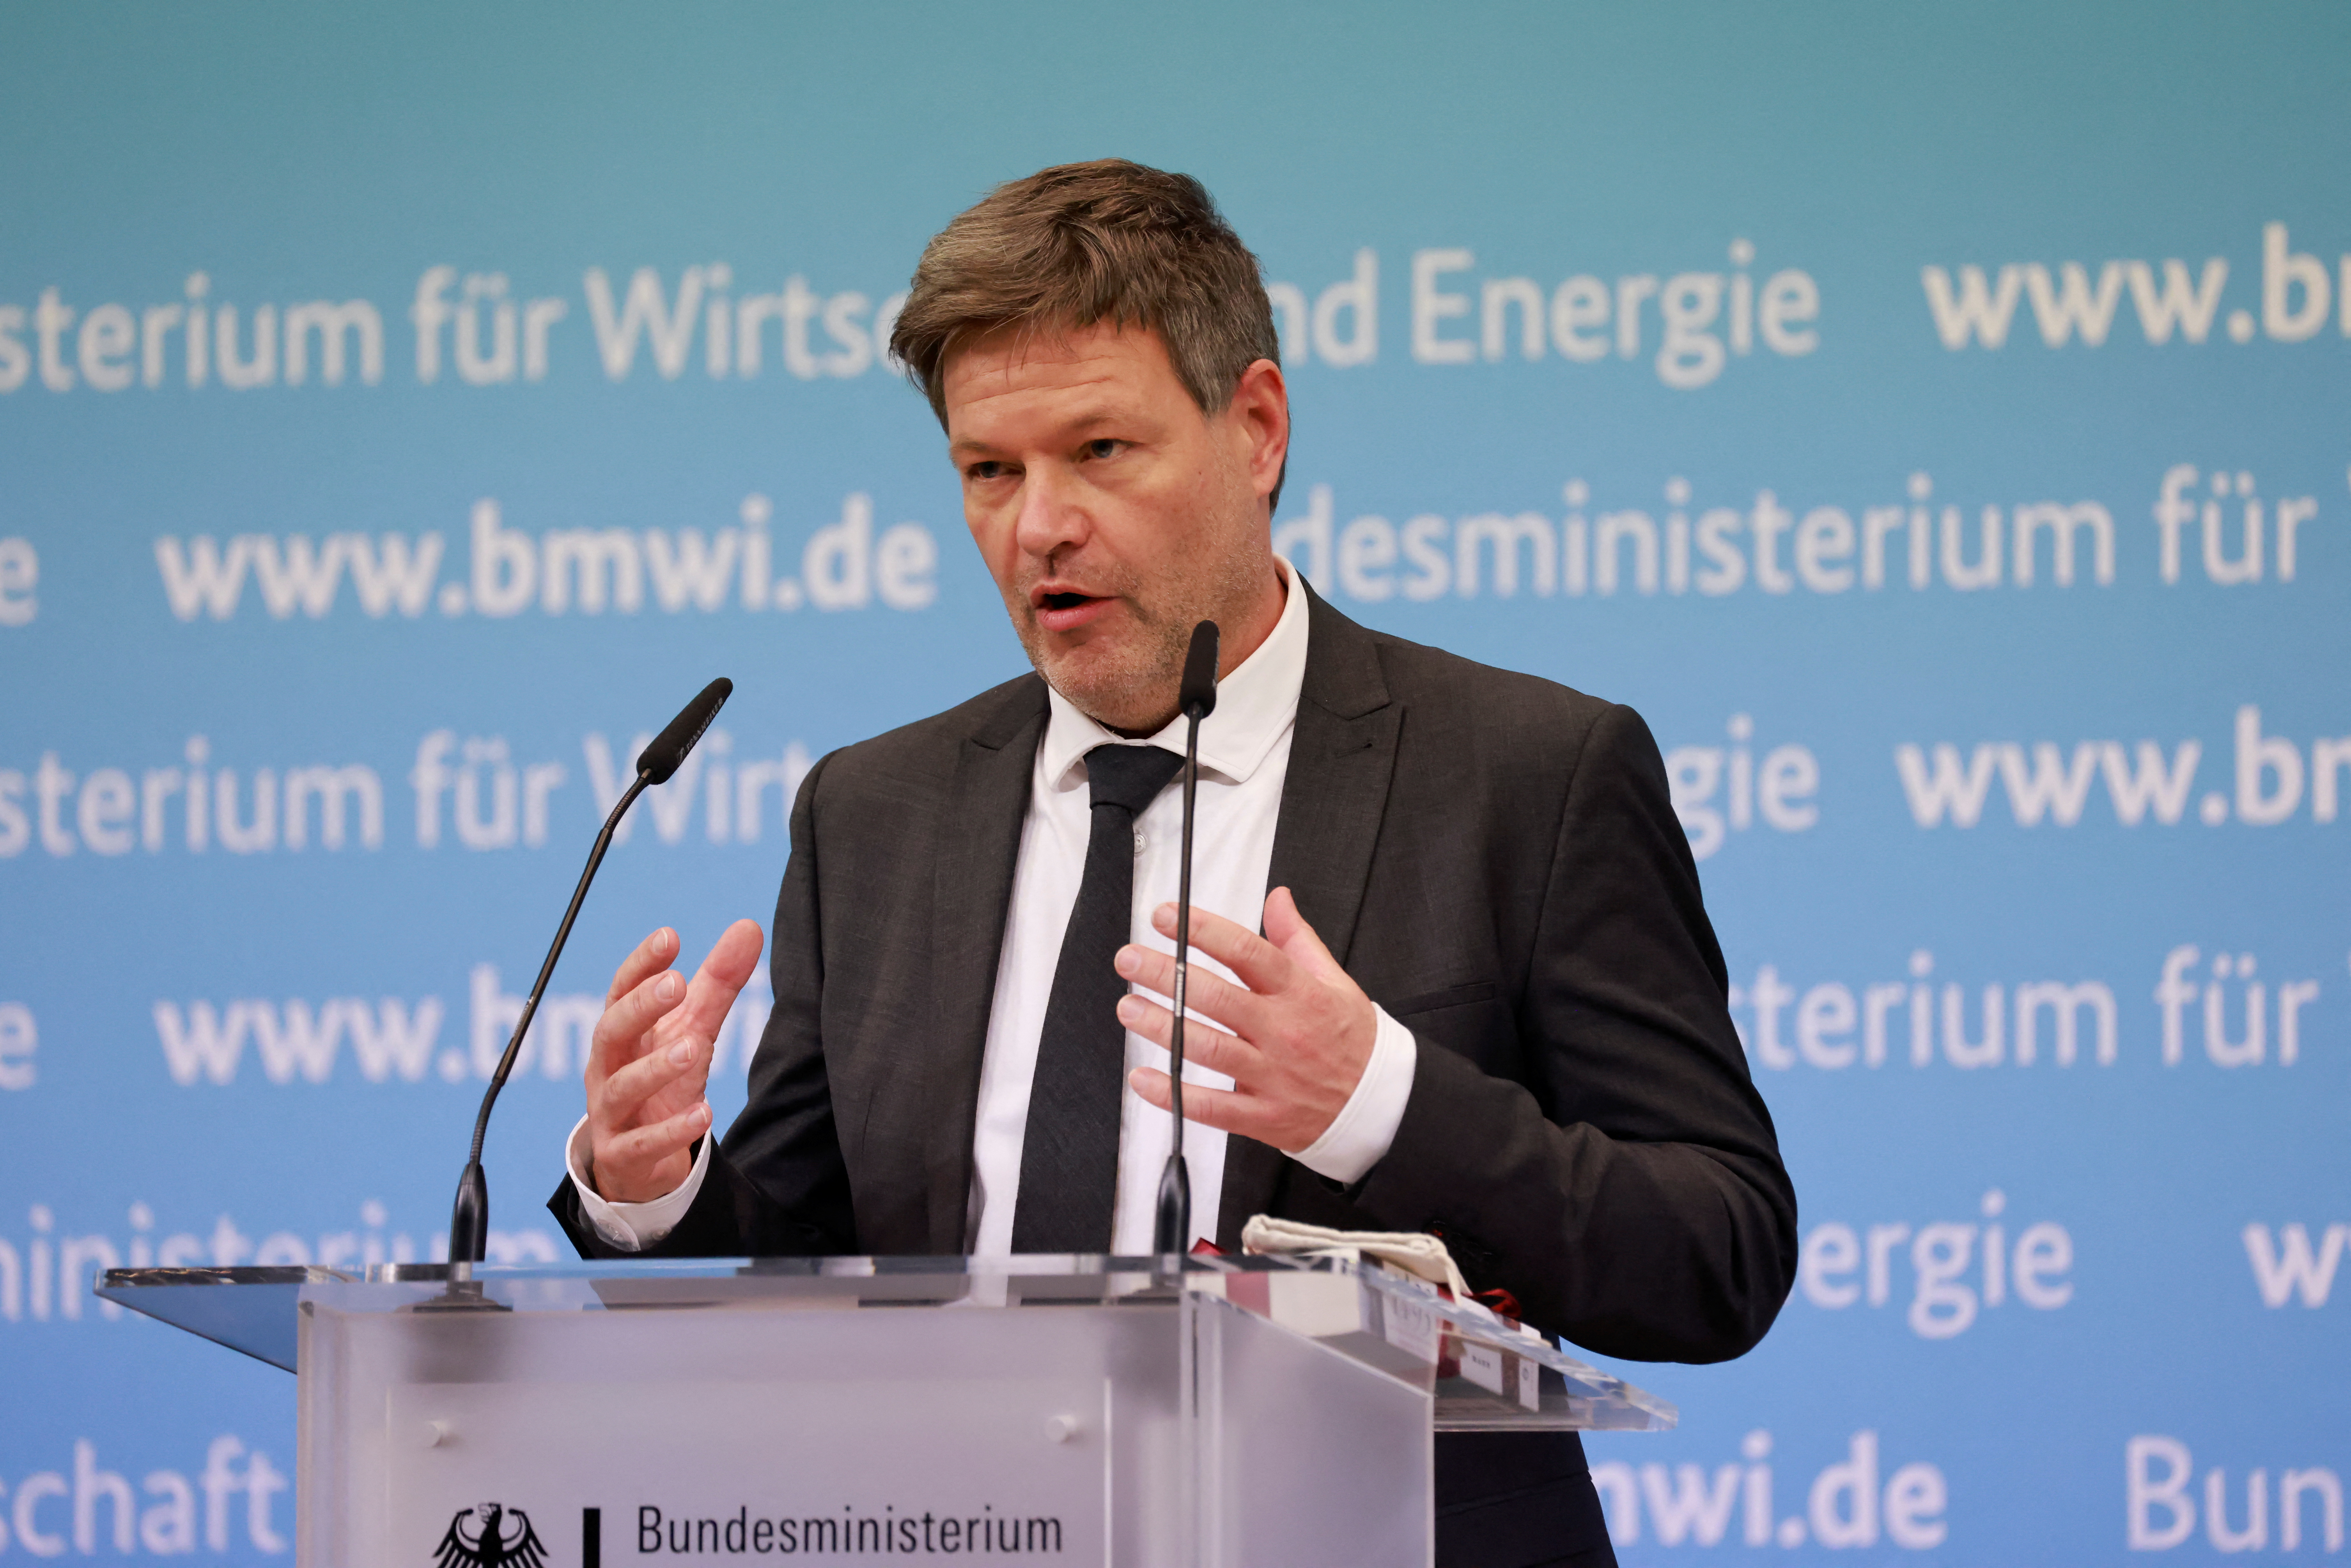 New German Economy and Climate Minister Robert Habeck officially takes office